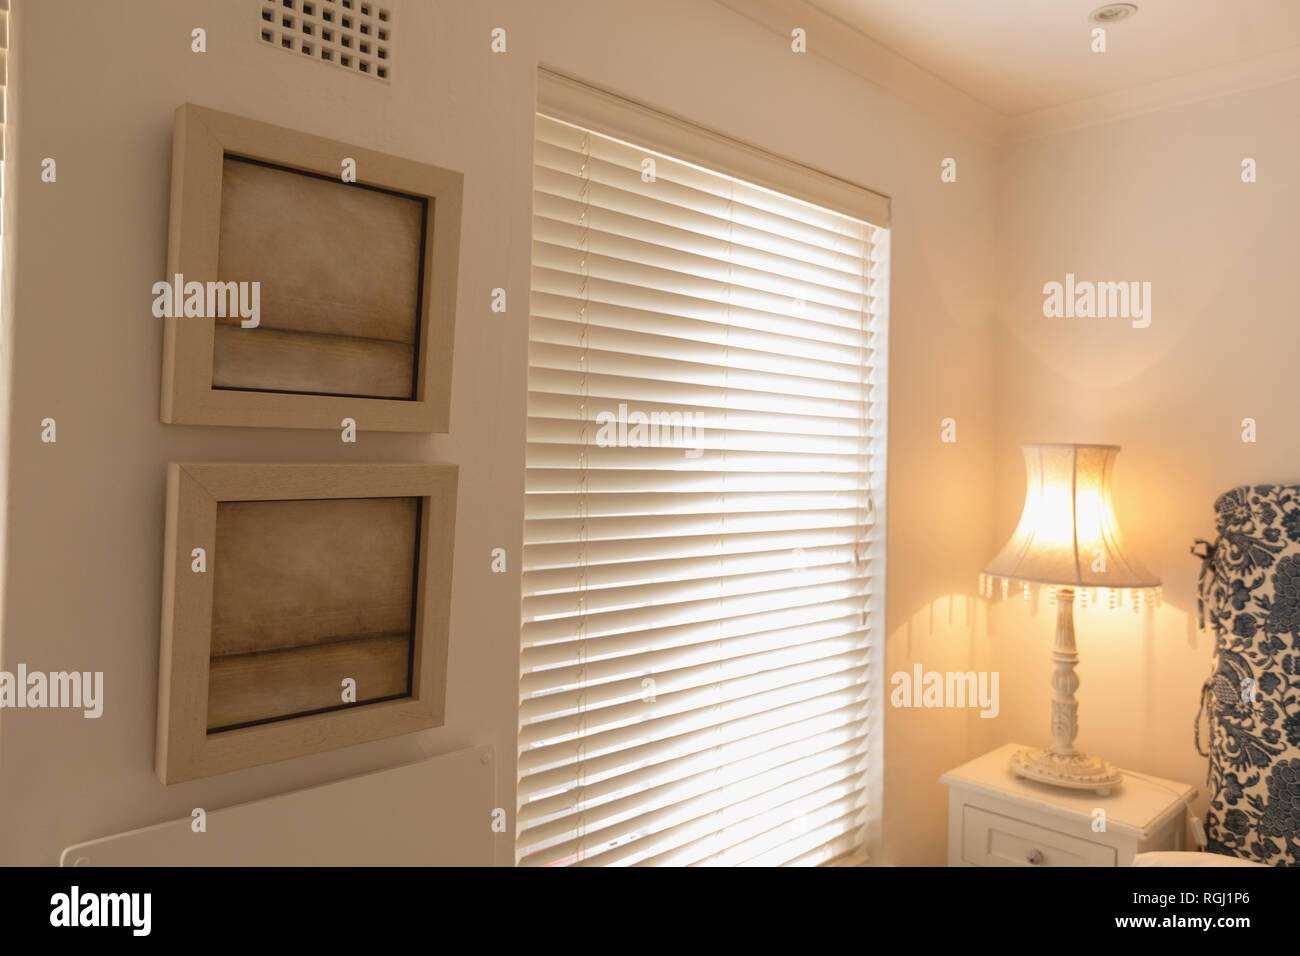 Wall frames near window blinds at home Stock Photo